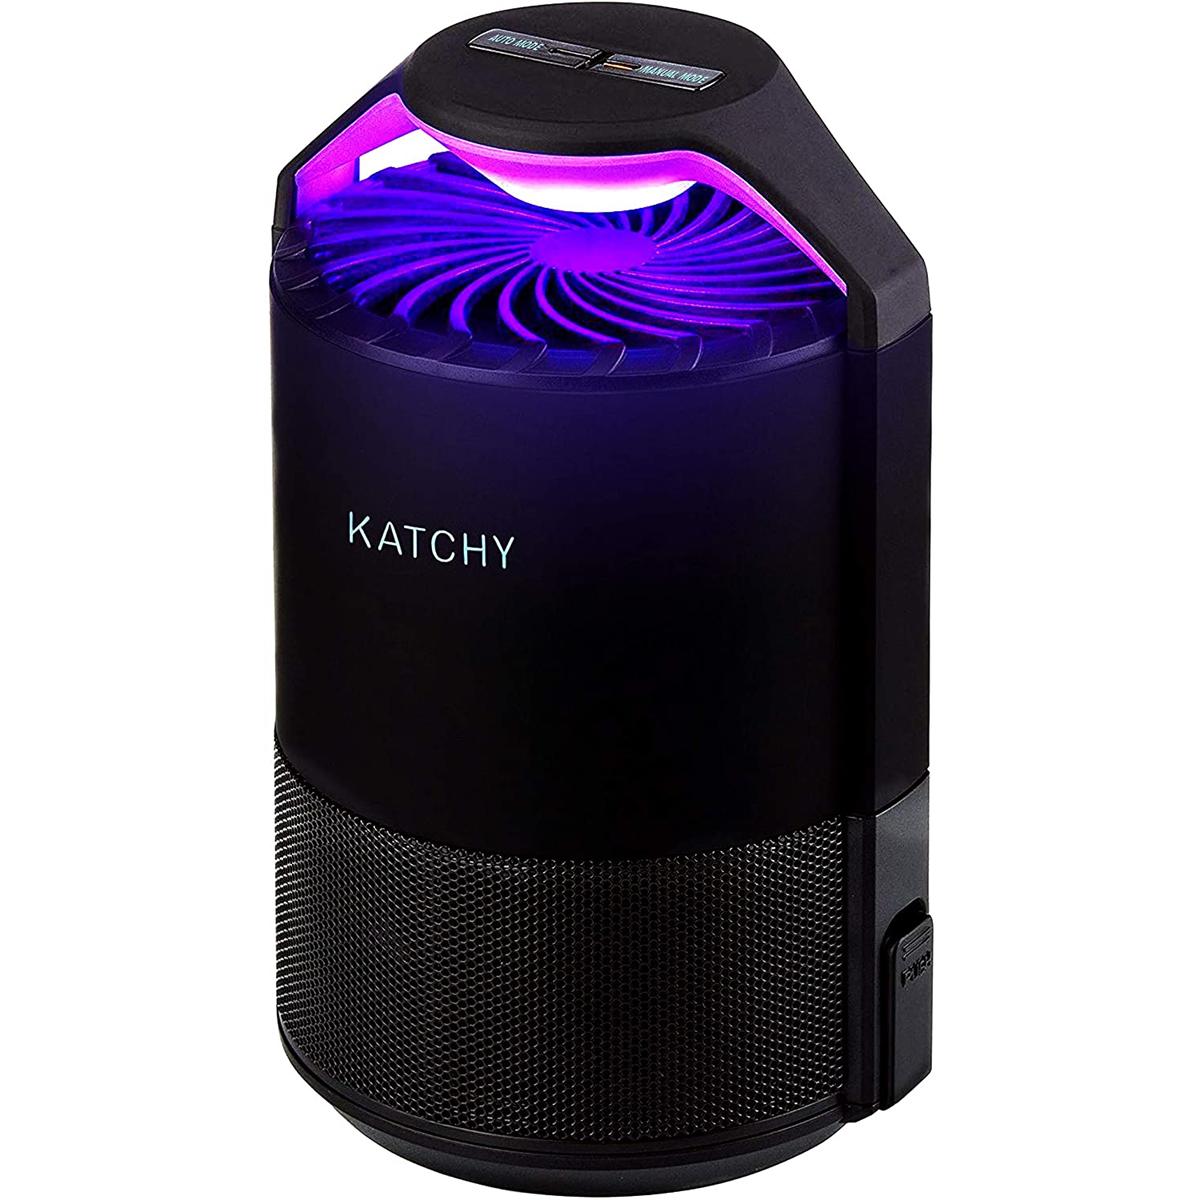 Katchy Indoor Insect and Flying Bugs Trap for $27.85 Shipped